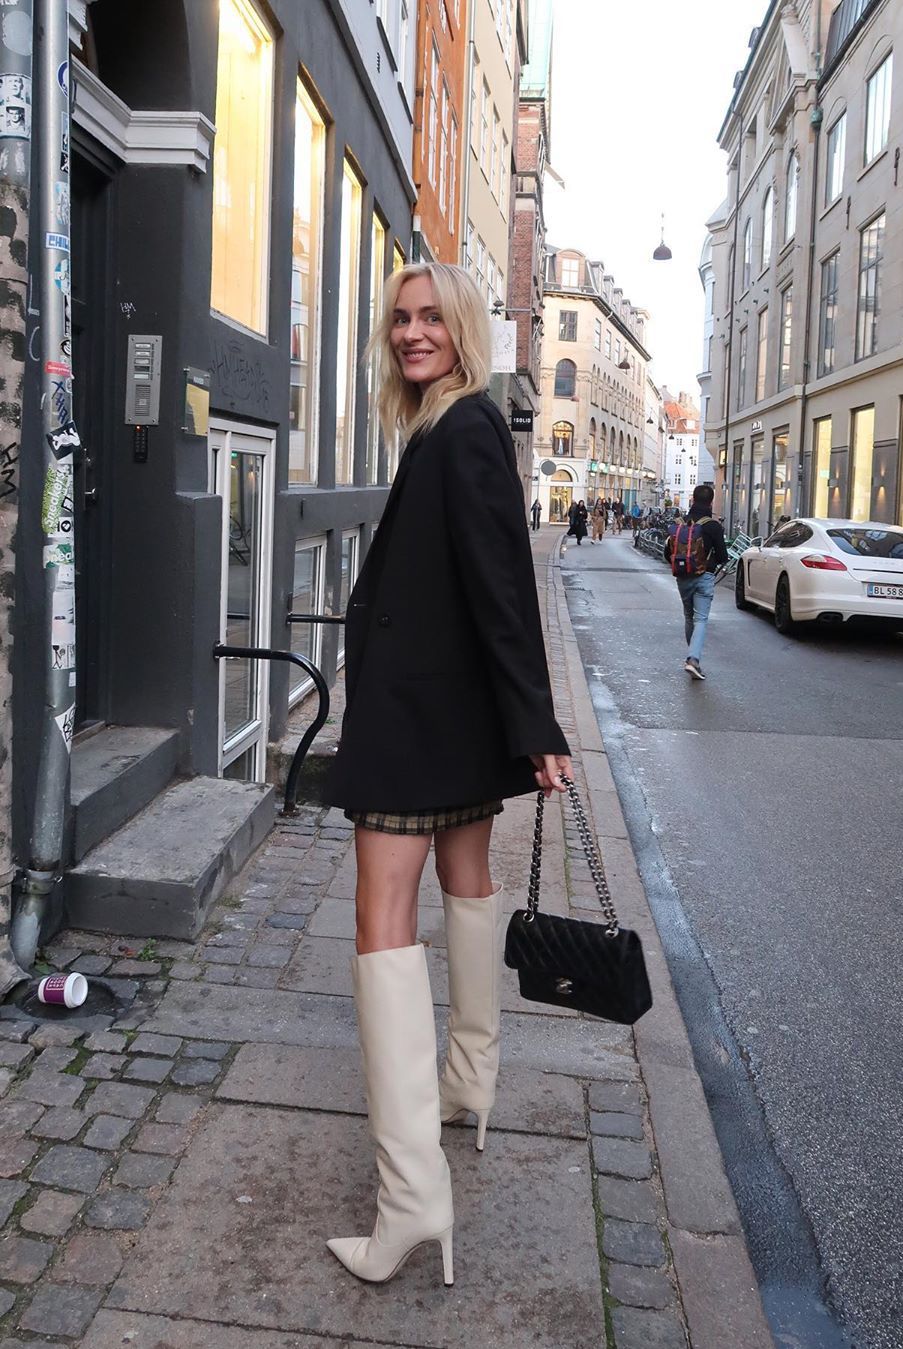 20 Ways To Wear an Oversized Blazer If You Love Short Skirts and ...